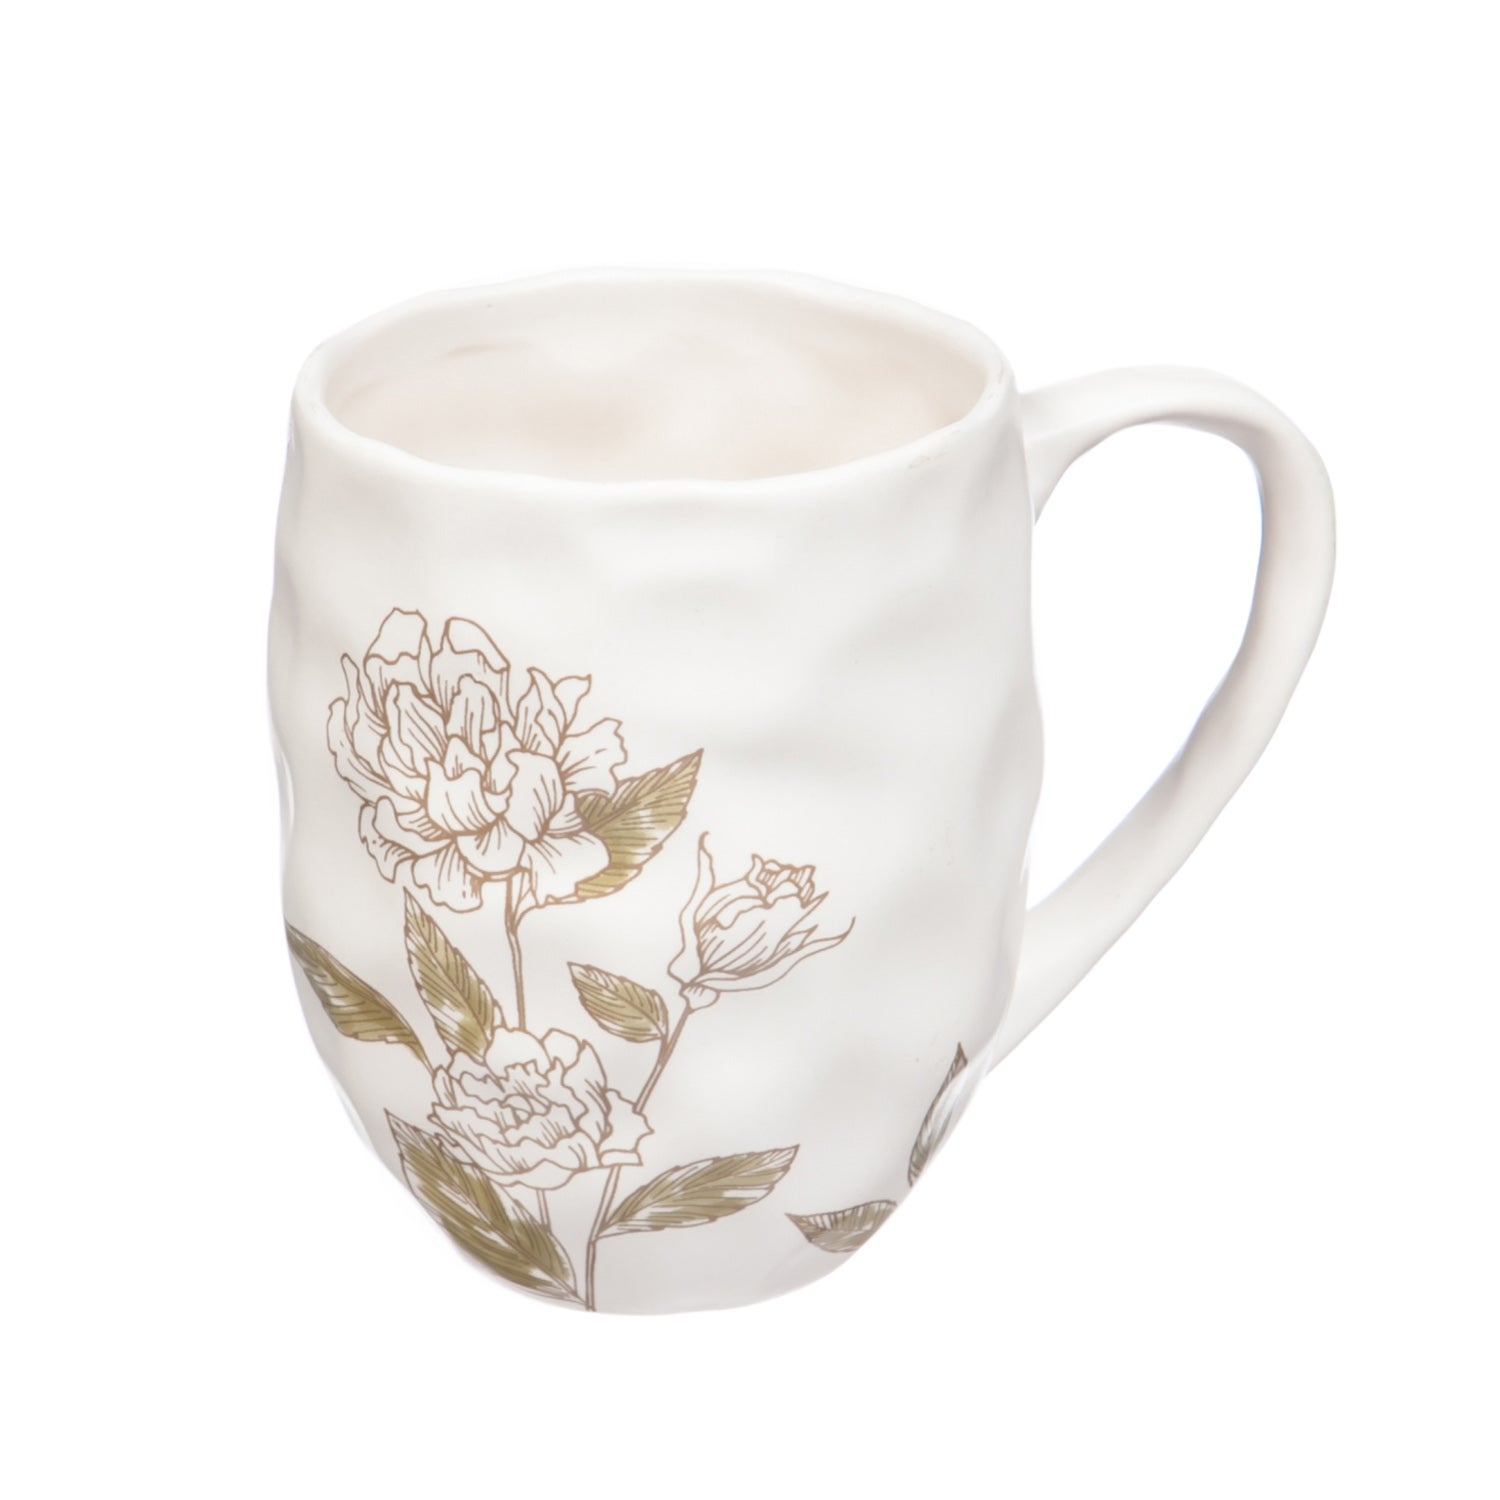 At Ease Traditional Ceramic Coffee Cup